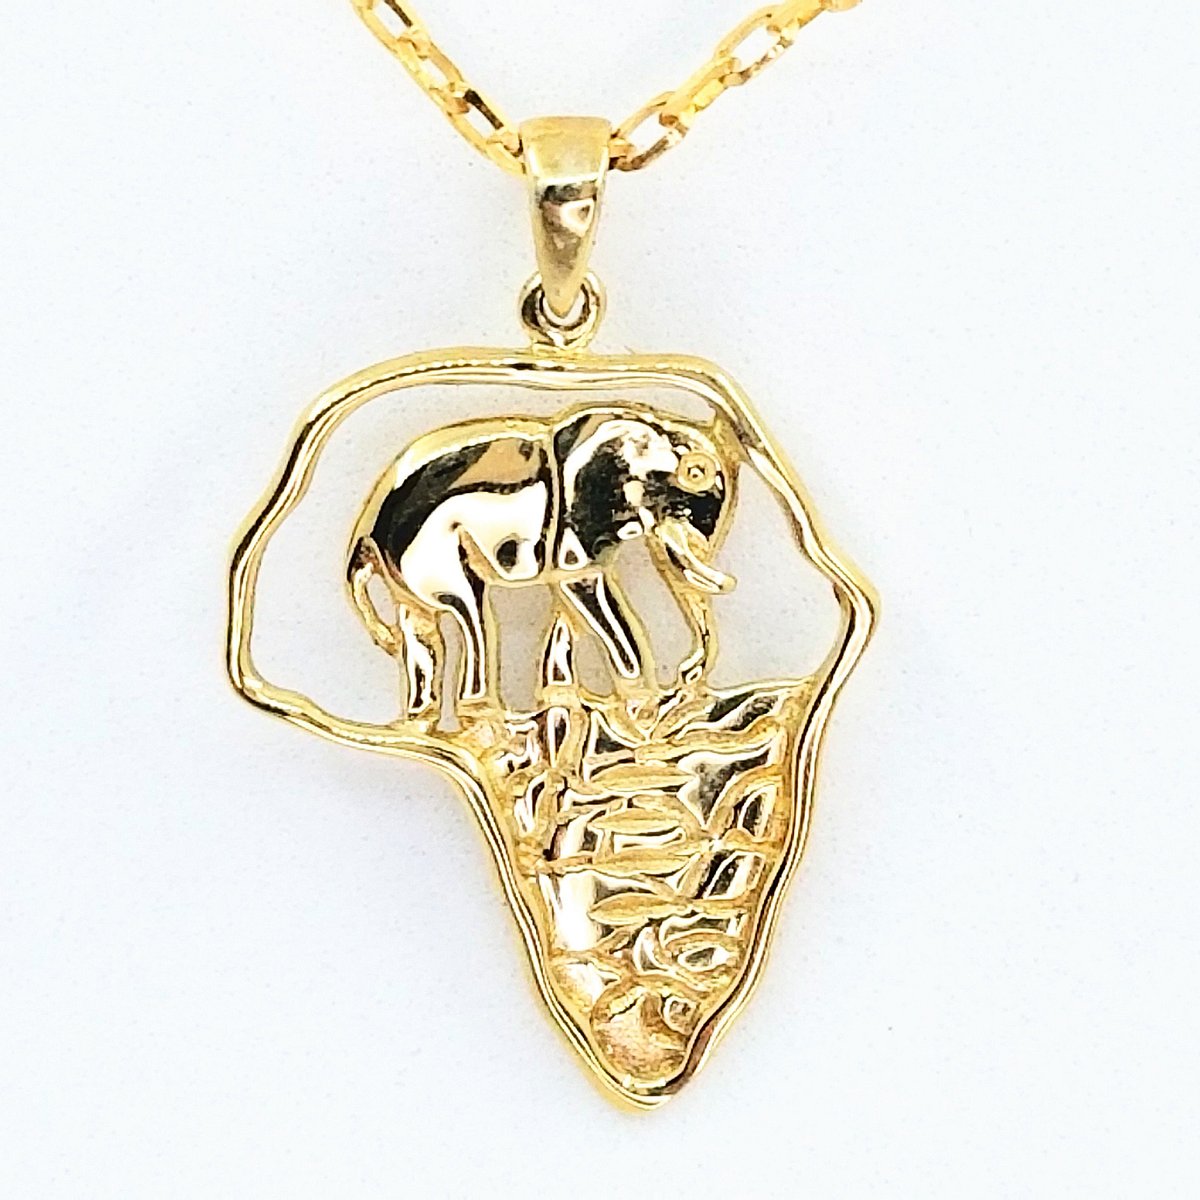 Map Of Africa Pendant ?w=1200&h=1200&s=1